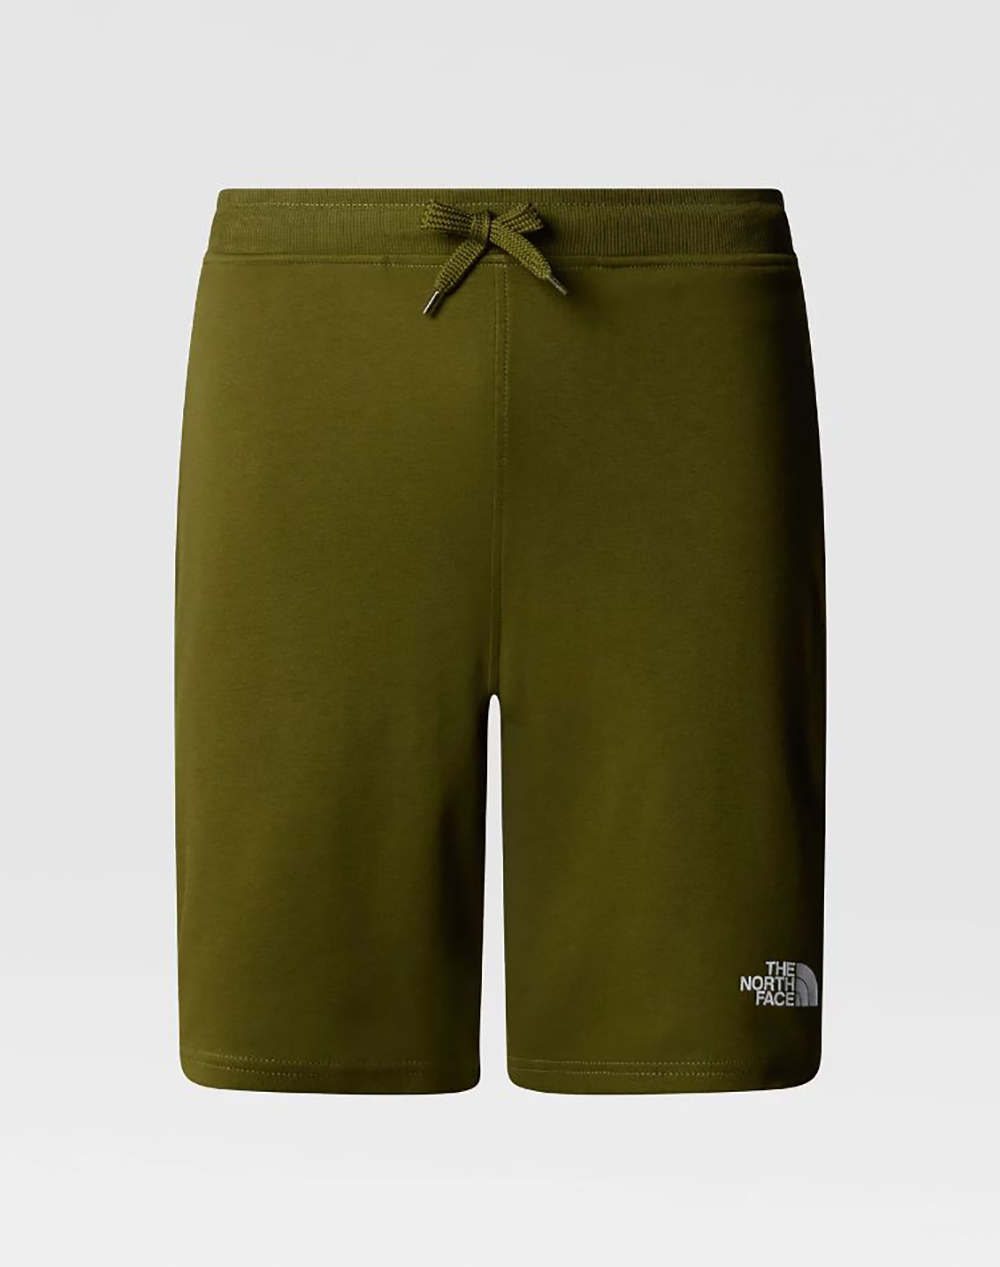 THE NORTH FACE M GRAPHIC SHORT LIGT NF0A3S4F-NFPIB Olive 3820ATNFA2300007_XR28475